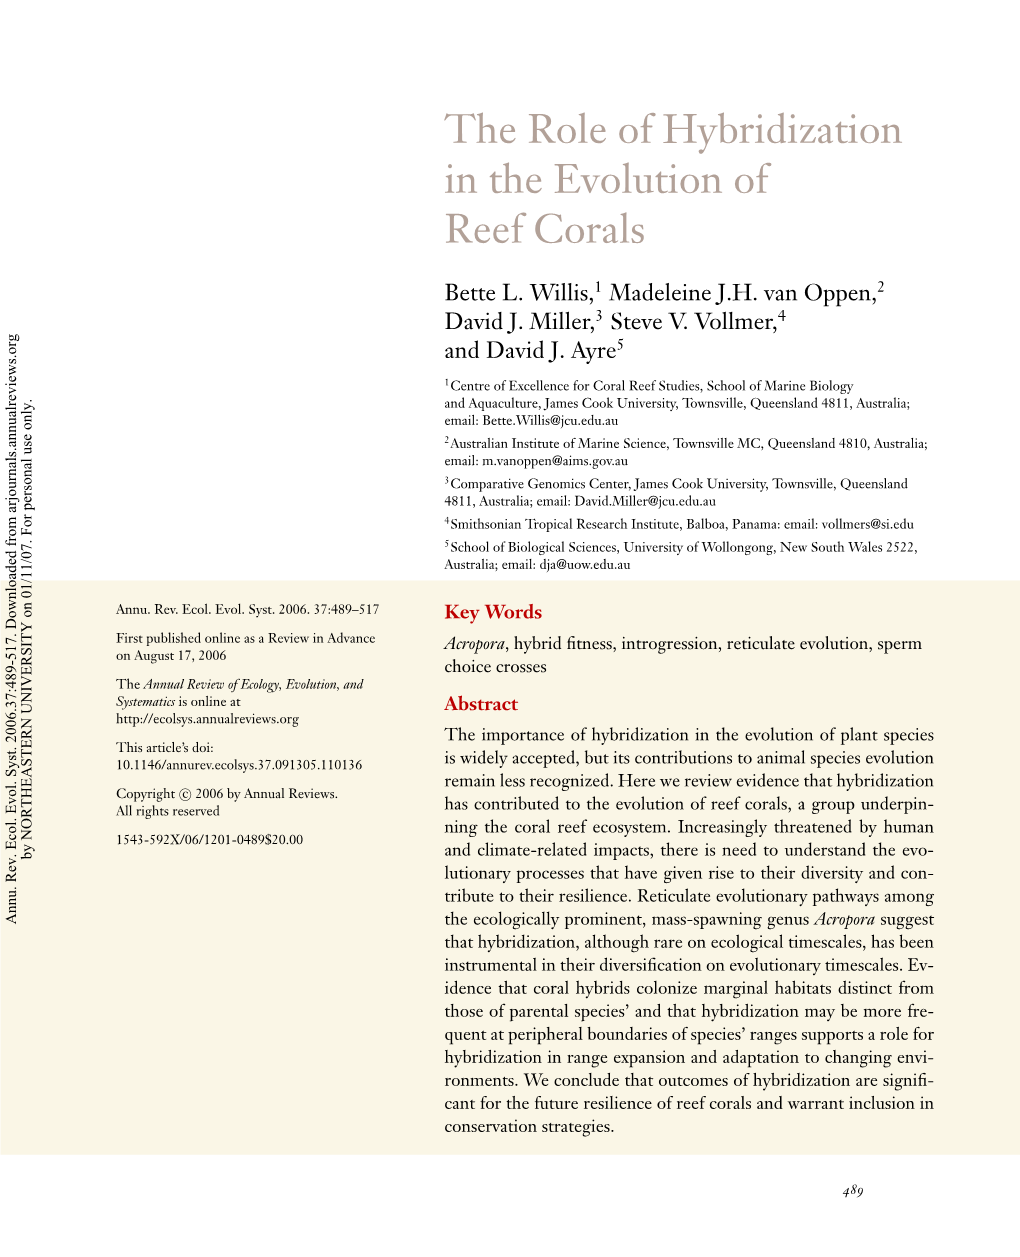 The Role of Hybridization in the Evolution of Reef Corals